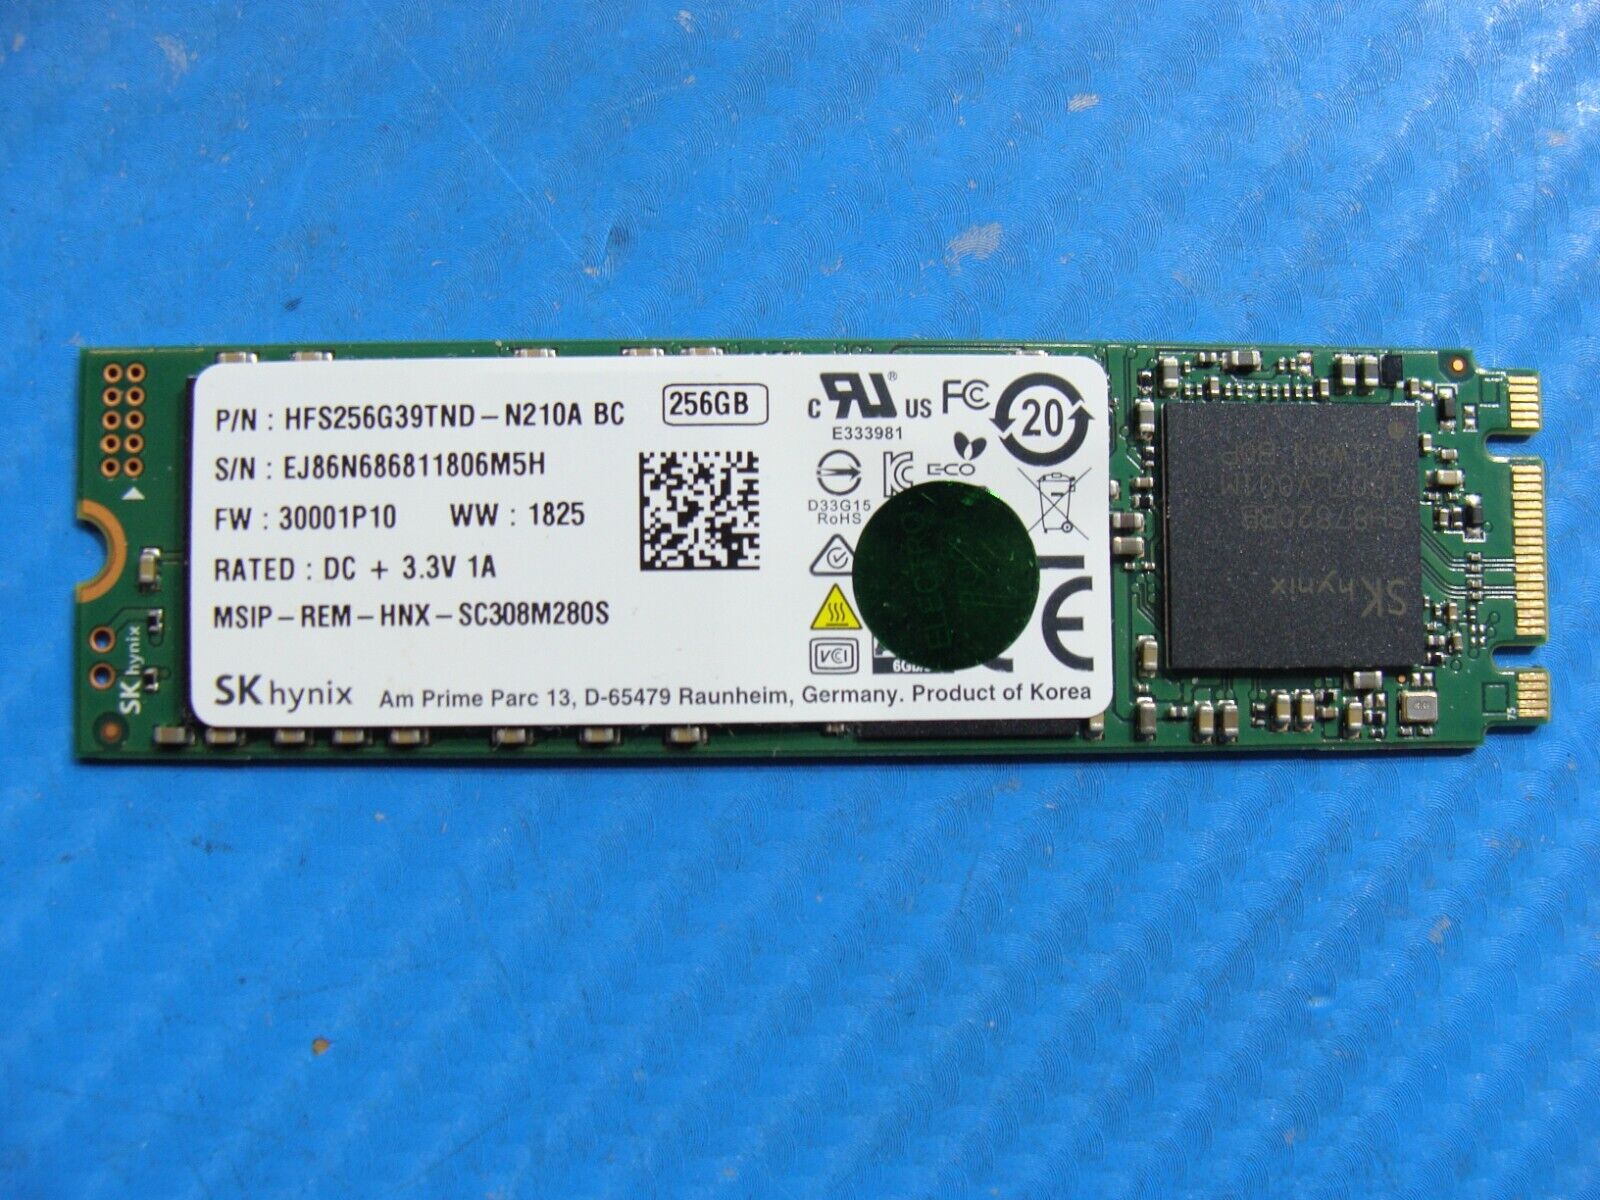 Acer SP513-52N SK Hynix 256GB SATA M.2 SSD Solid State Drive HFS256G39TND-N210A